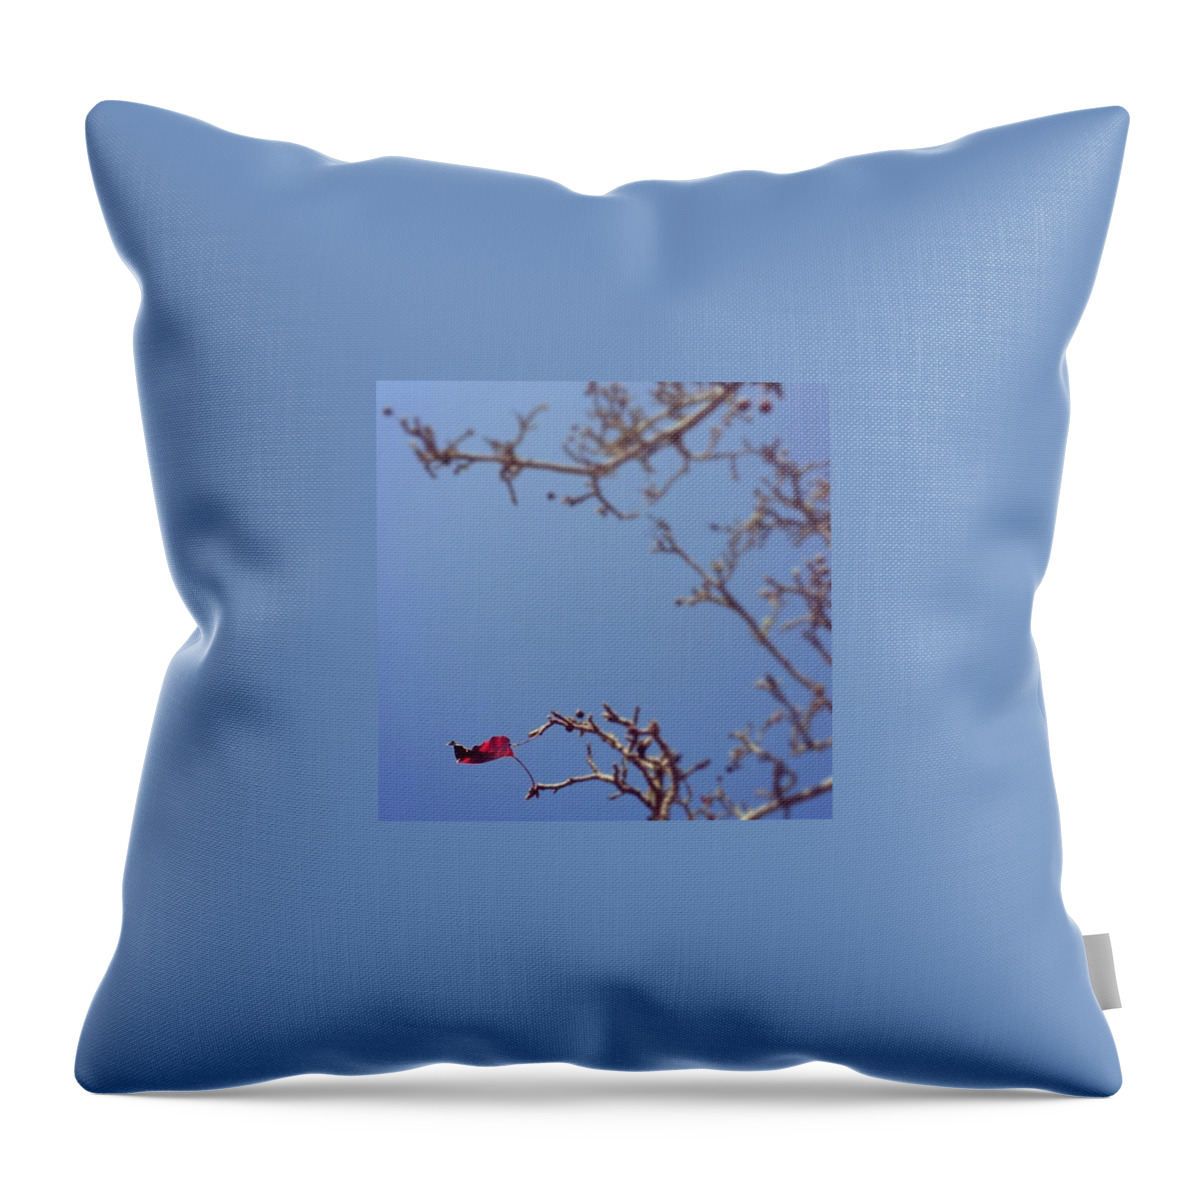 Single Leaf Throw Pillow featuring the photograph Lone Leaf by Alison Photography